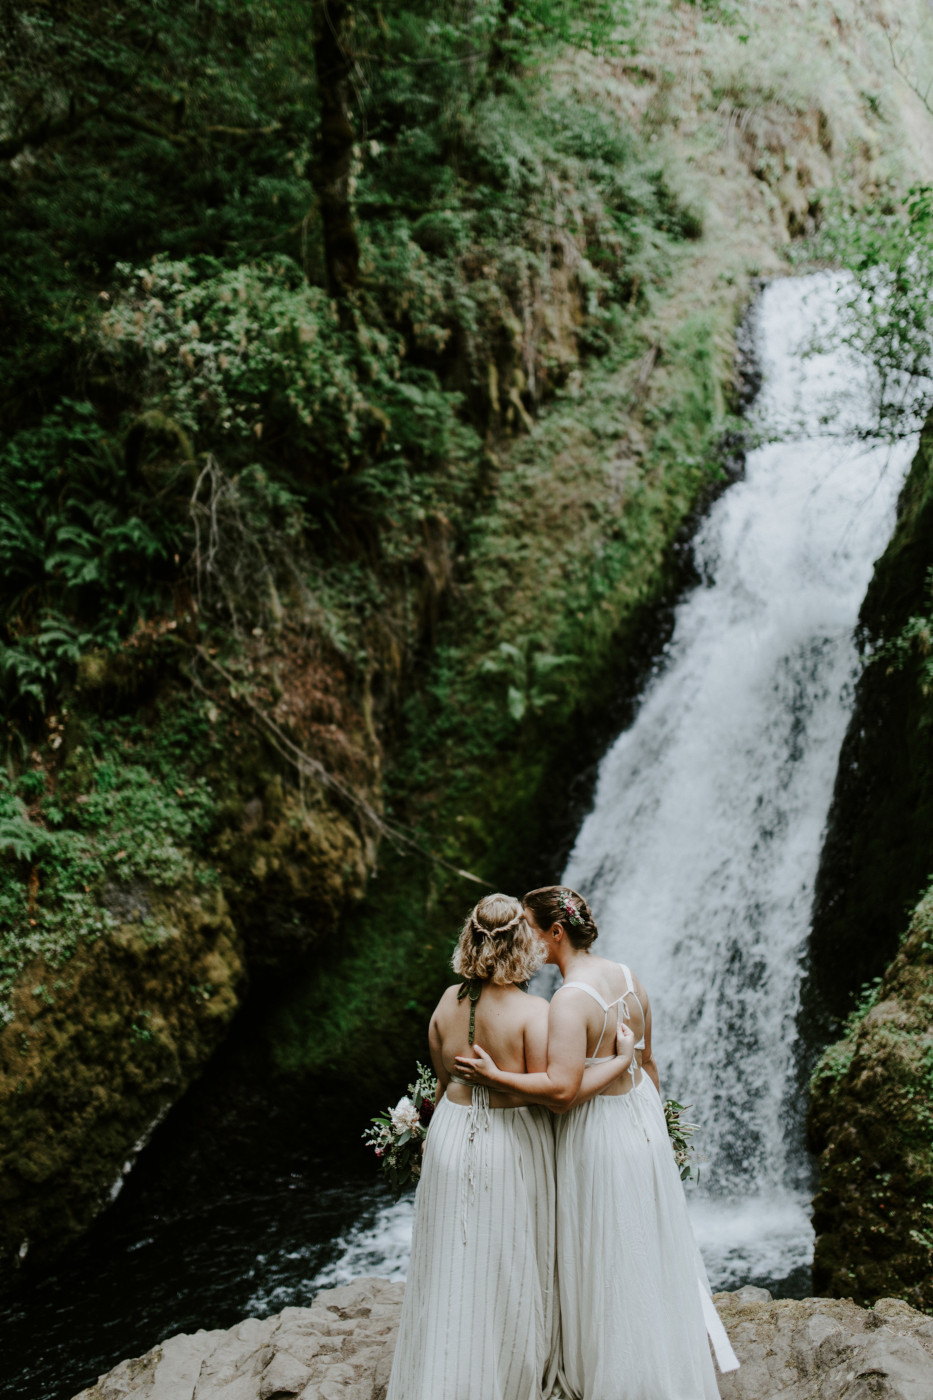 Audrey and Kate stand side by side in front of Bridal Veil Falls. Elopement wedding photography at Bridal Veil Falls by Sienna Plus Josh.